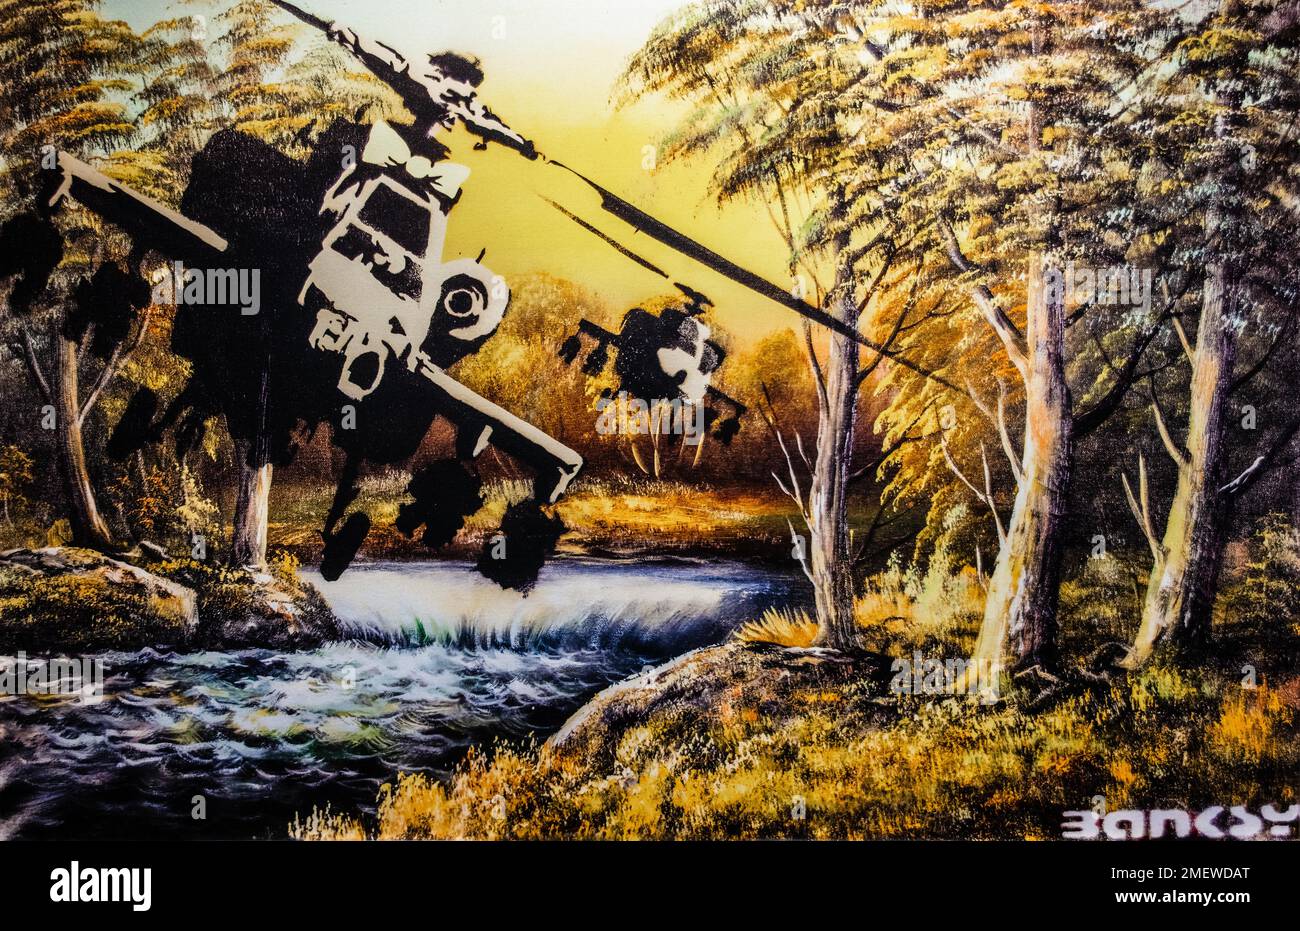 Happy Chopper, Crude Oil, 2005, romantic version of war is questioned, Banksy, exhibition about the street artist, Muelheim, Germany Stock Photo